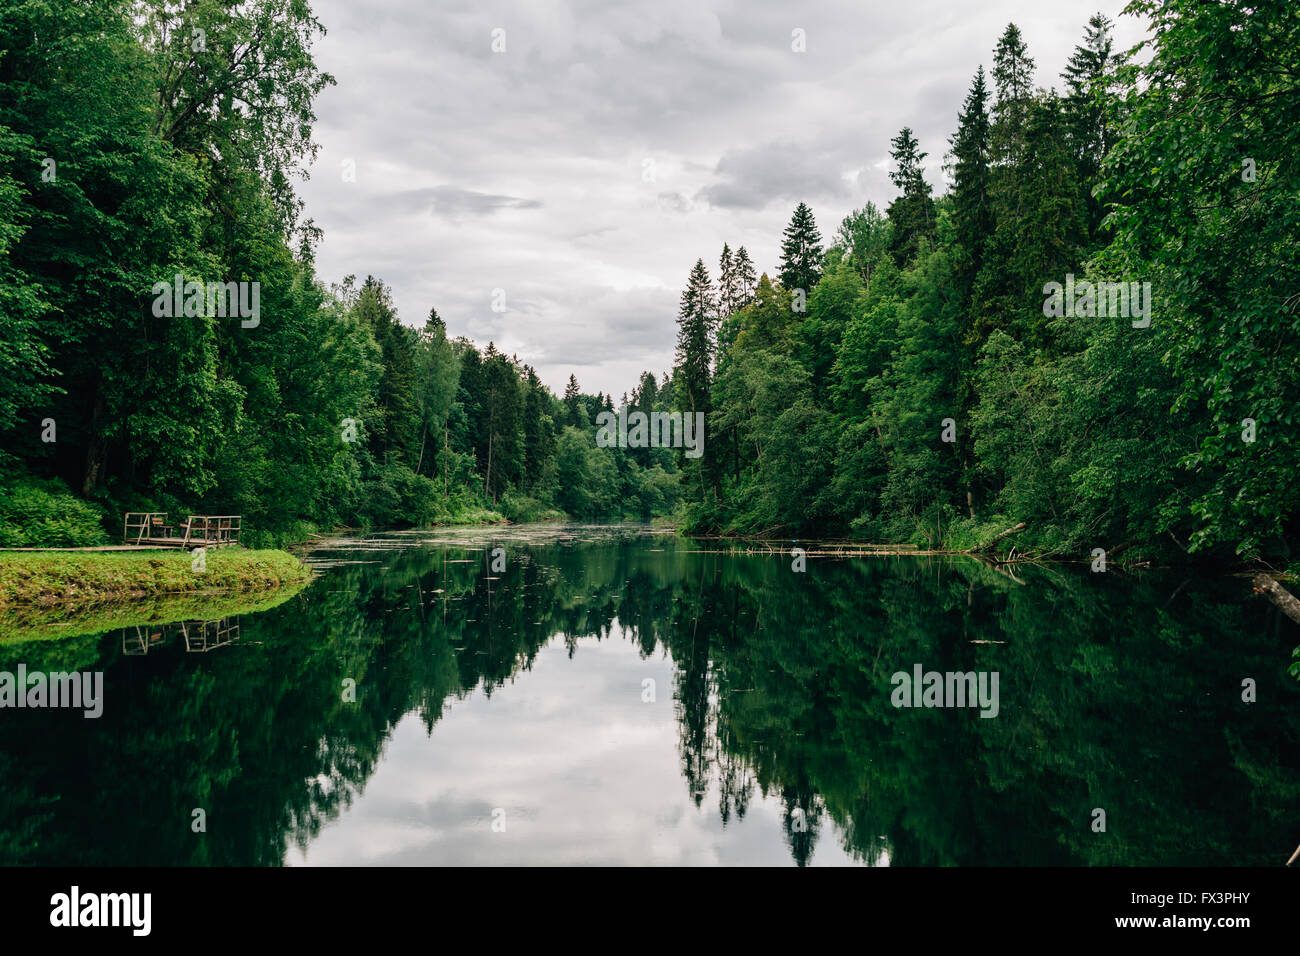 Beautiful landscape with a lake and a green forest. Stock Photo